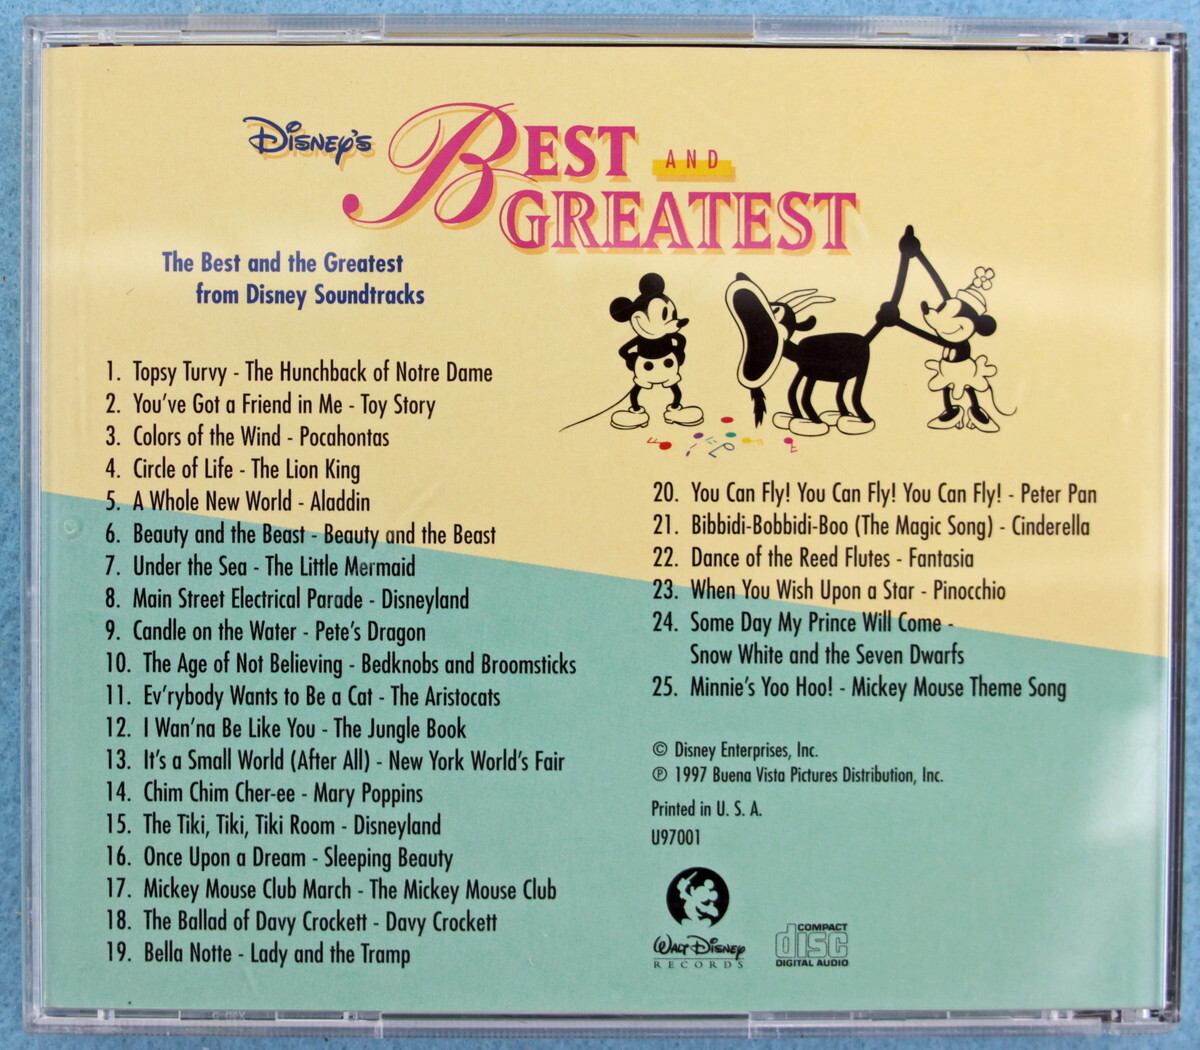 cmbDY] Disney's BEST AND GREATEST [US盤]の画像2